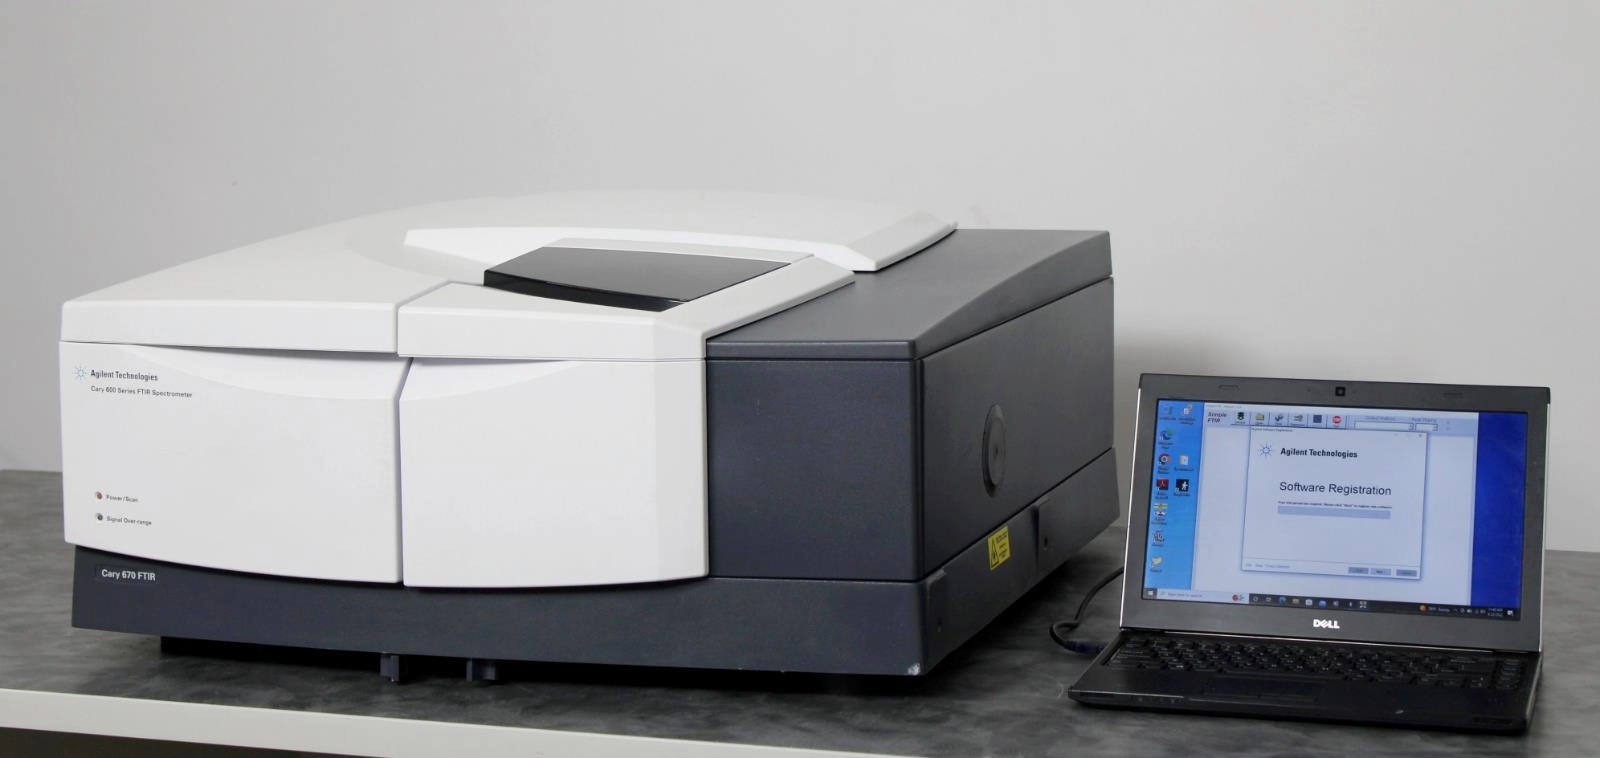 Agilent Cary 670 FTIR Spectrometer with Laptop and Warranty